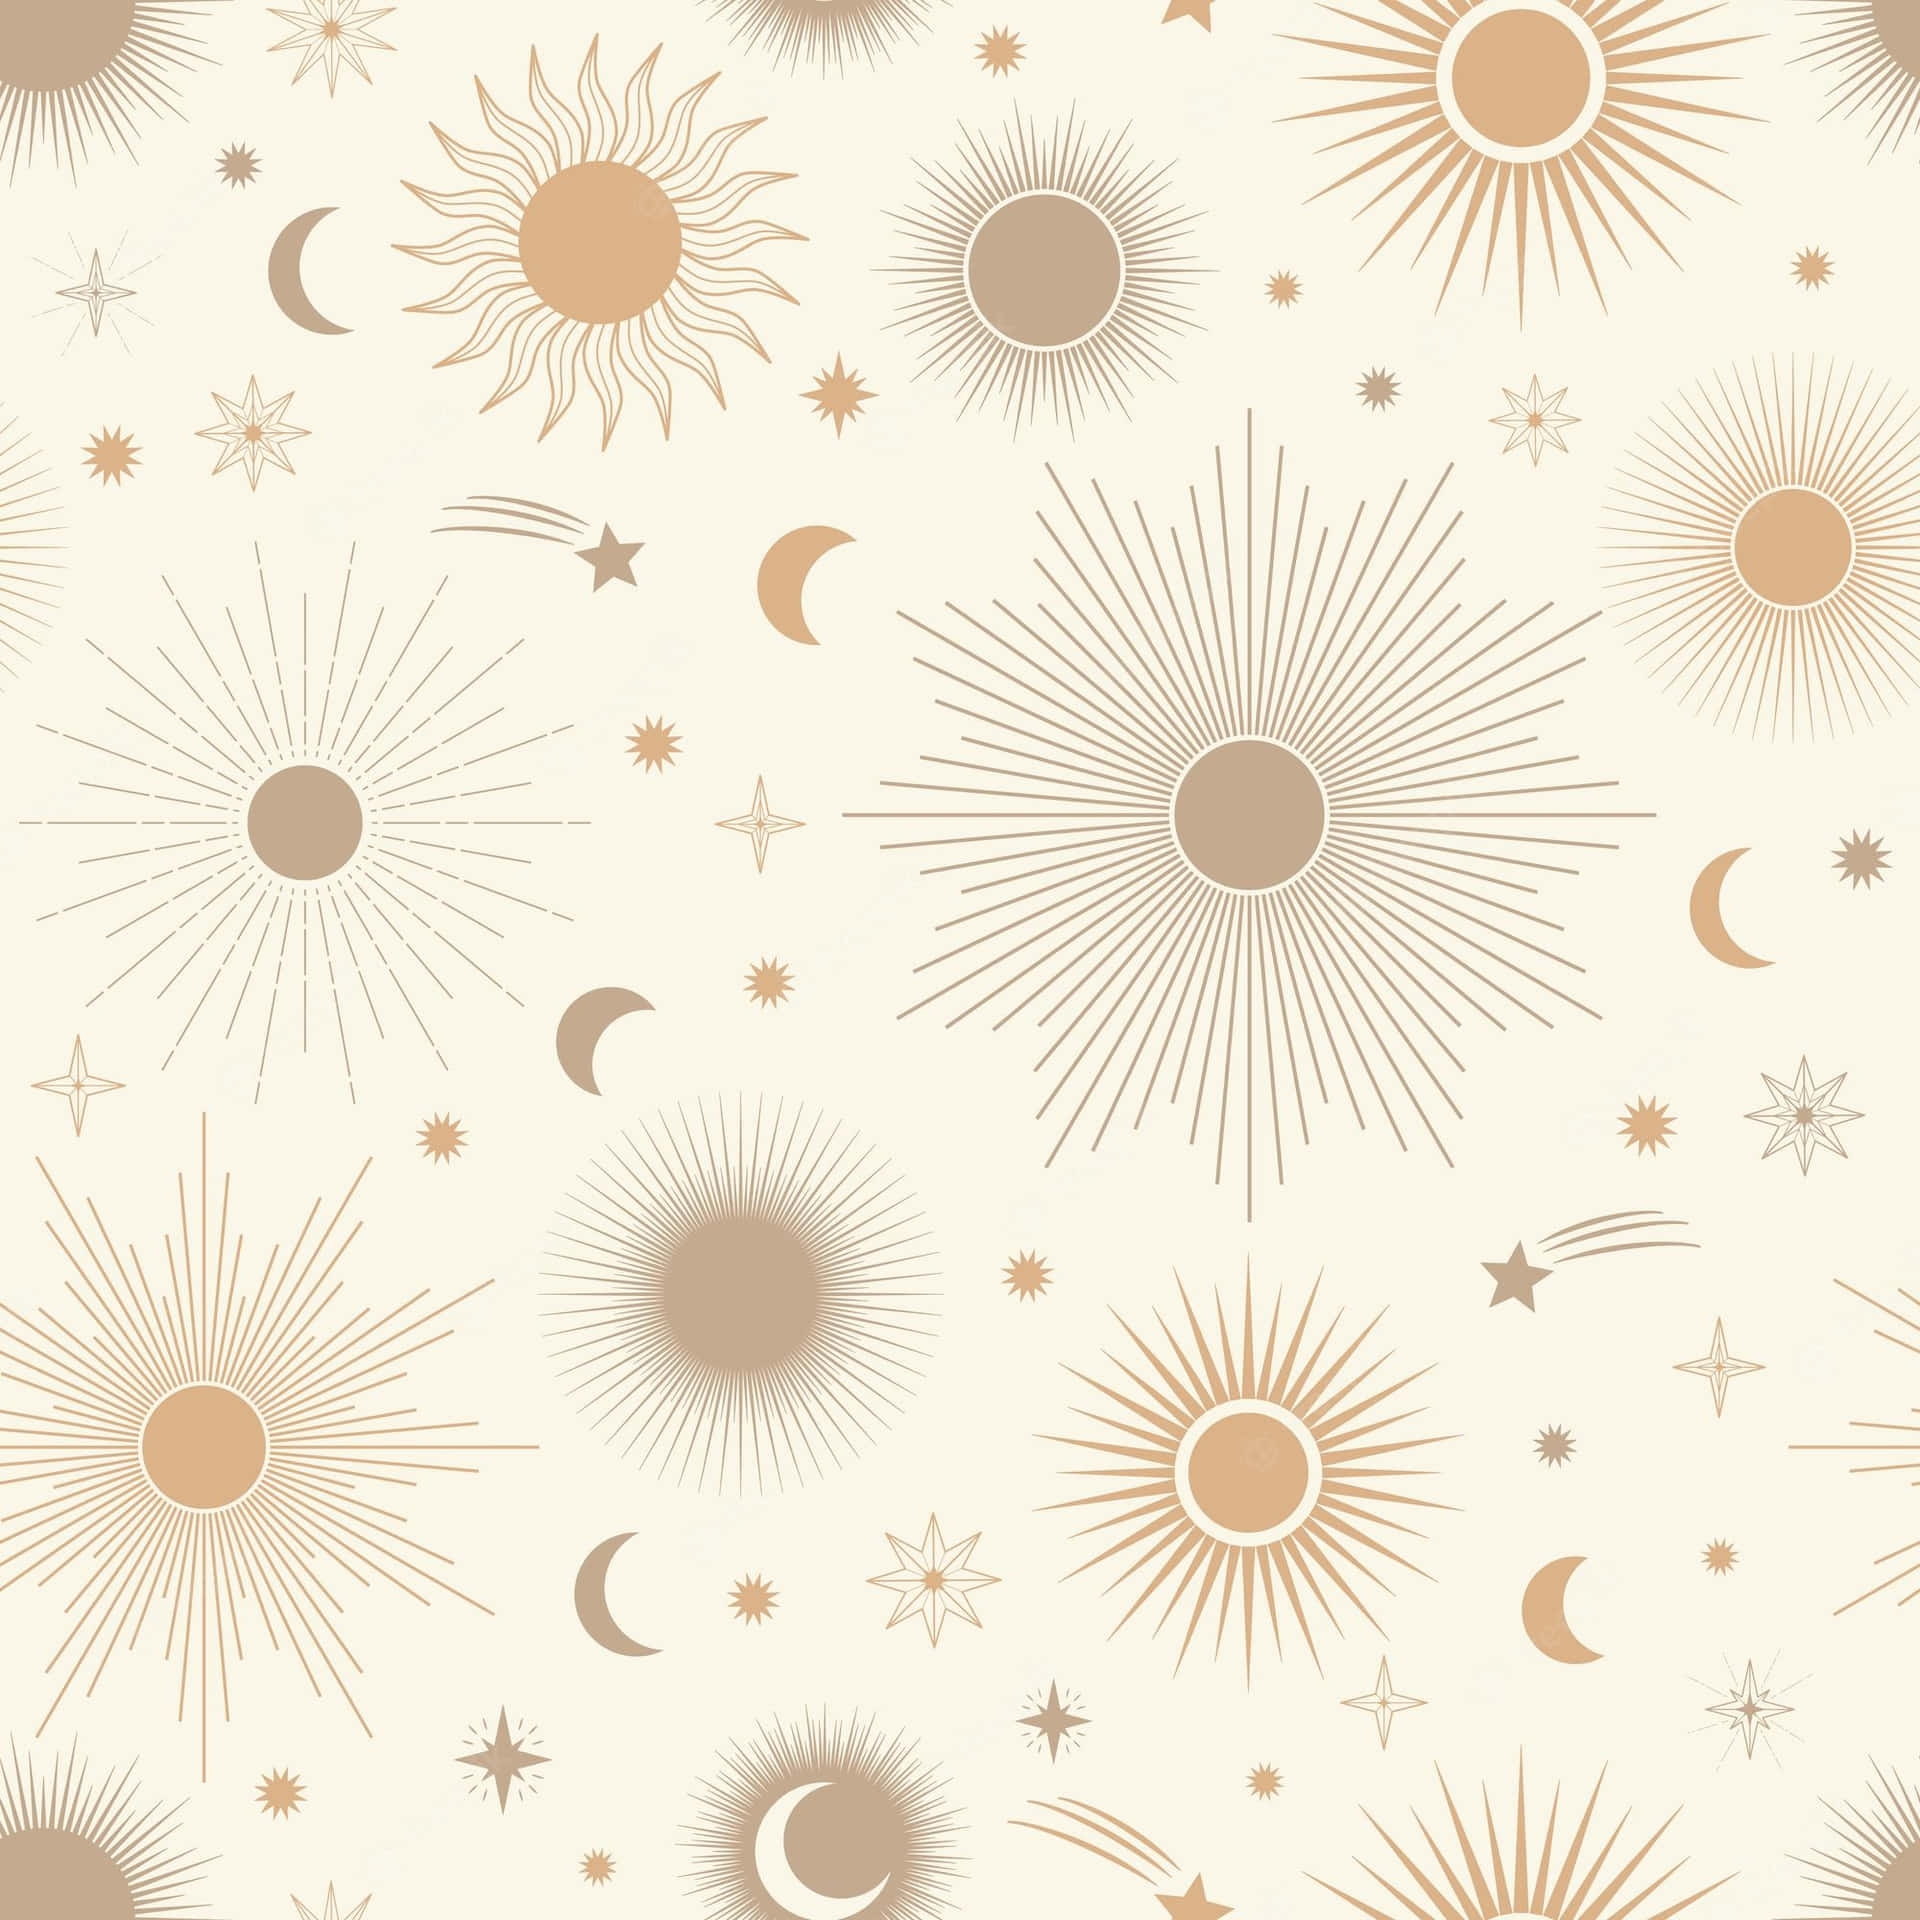 A Seamless Pattern With Suns And Stars Wallpaper